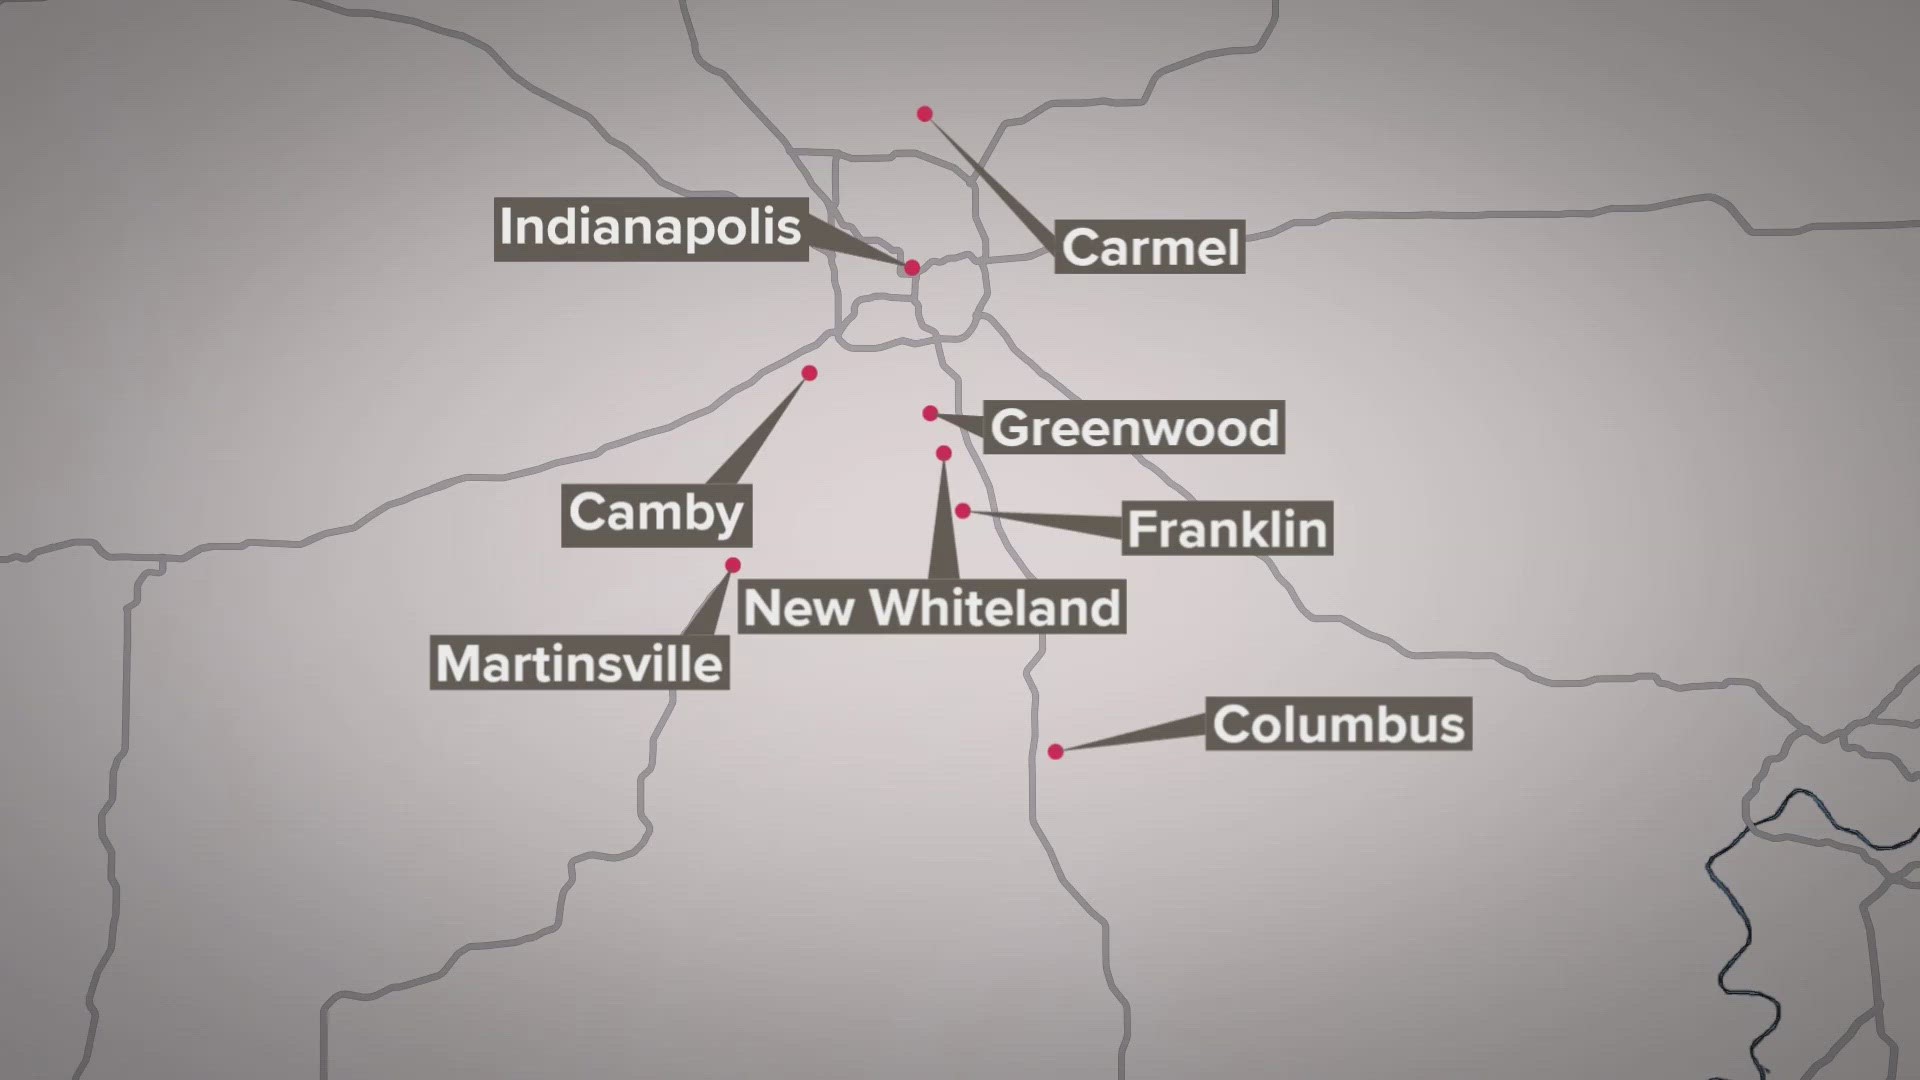 Investigators believe those people traveled from all these cities across central Indiana to sell drugs in Johnson County.